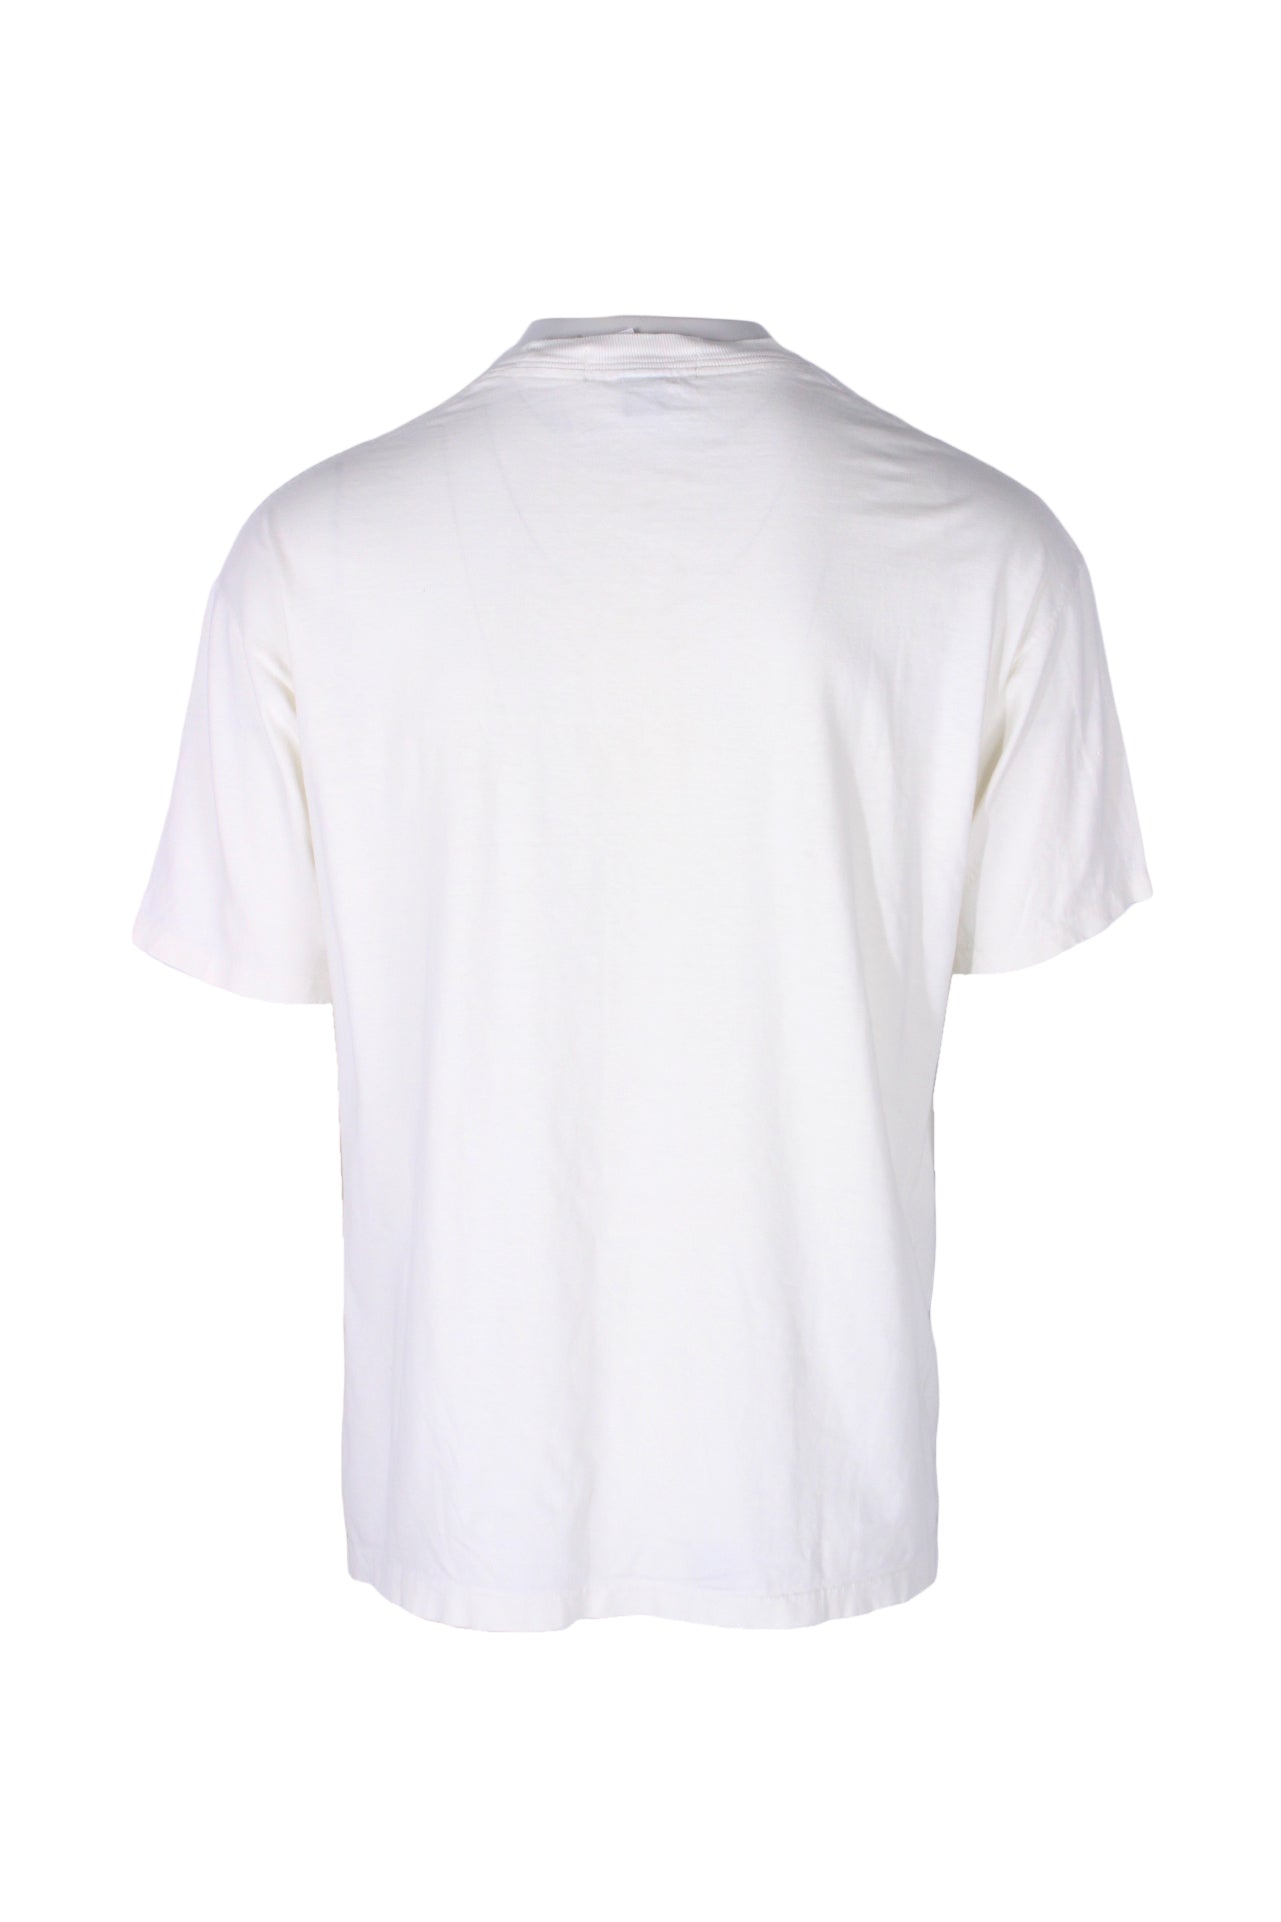 back angle of vintage t-shirt. short sleeves with single stitch hem/cuffs. 